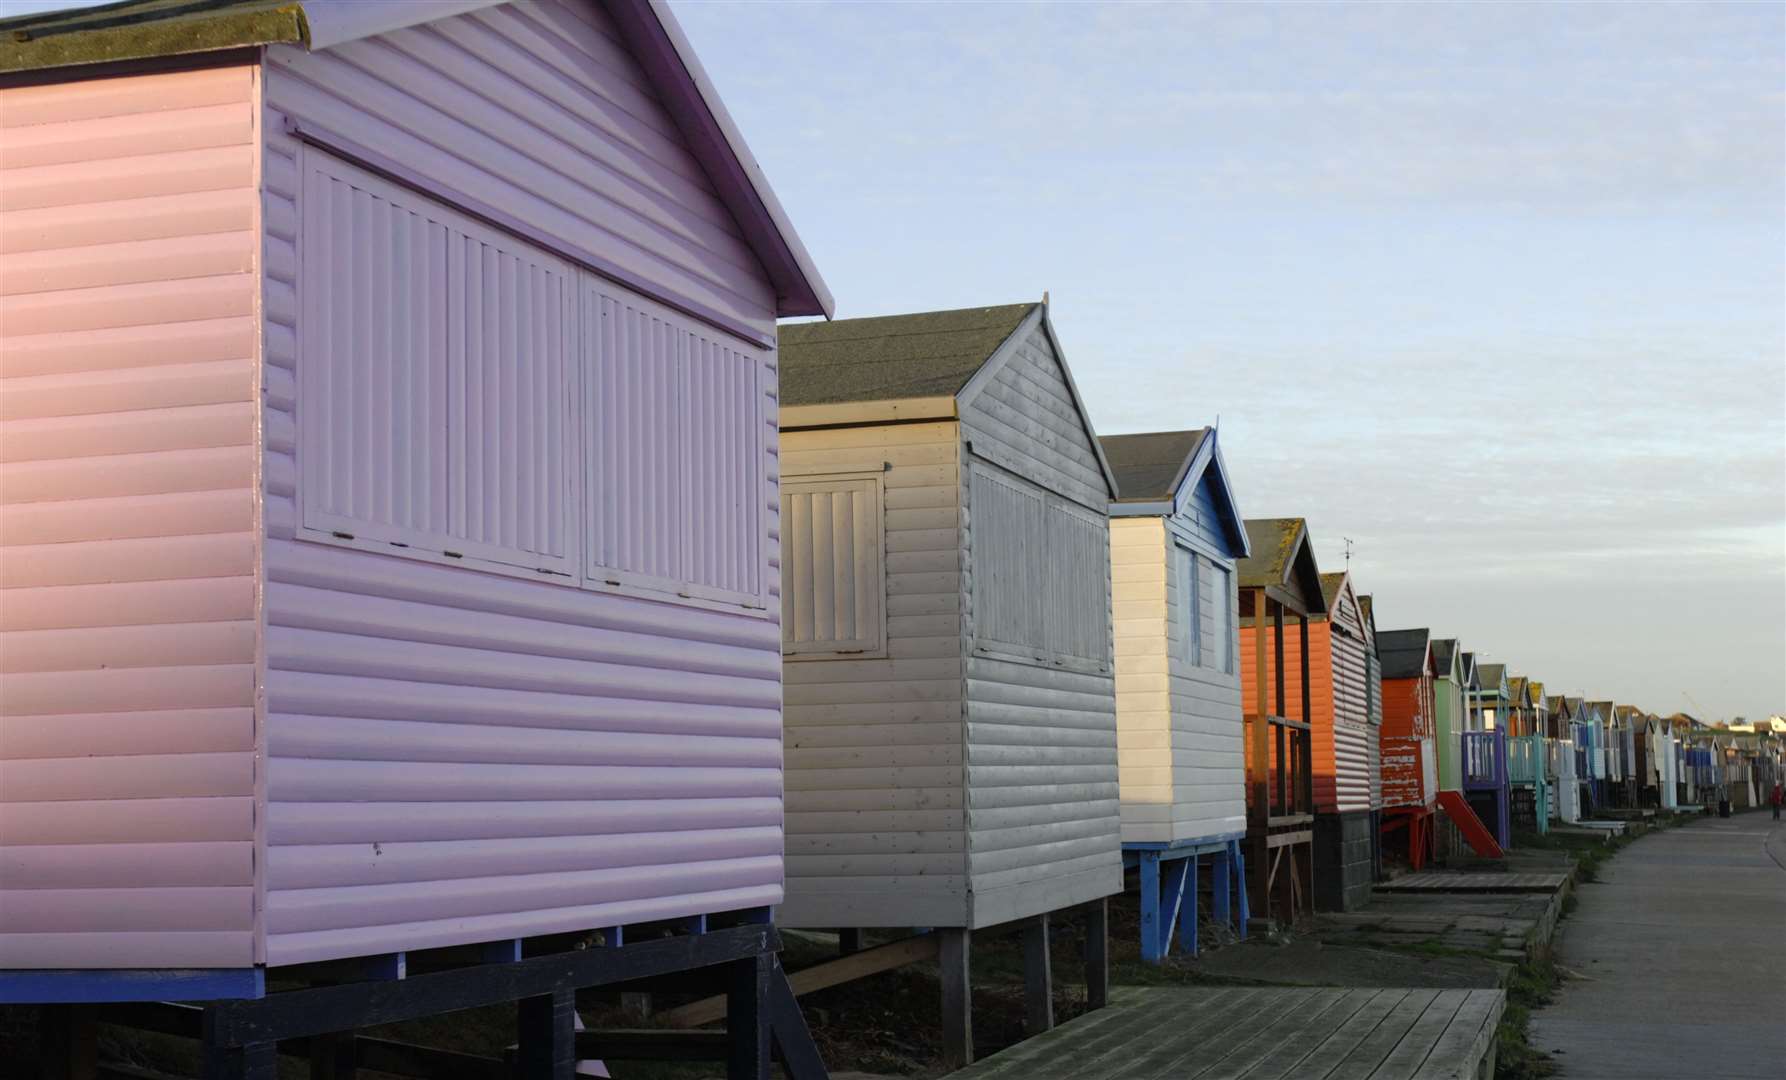 Council bosses had hoped to build 20 new beach huts in Tankerton, in addition to a further 94 in Herne Bay